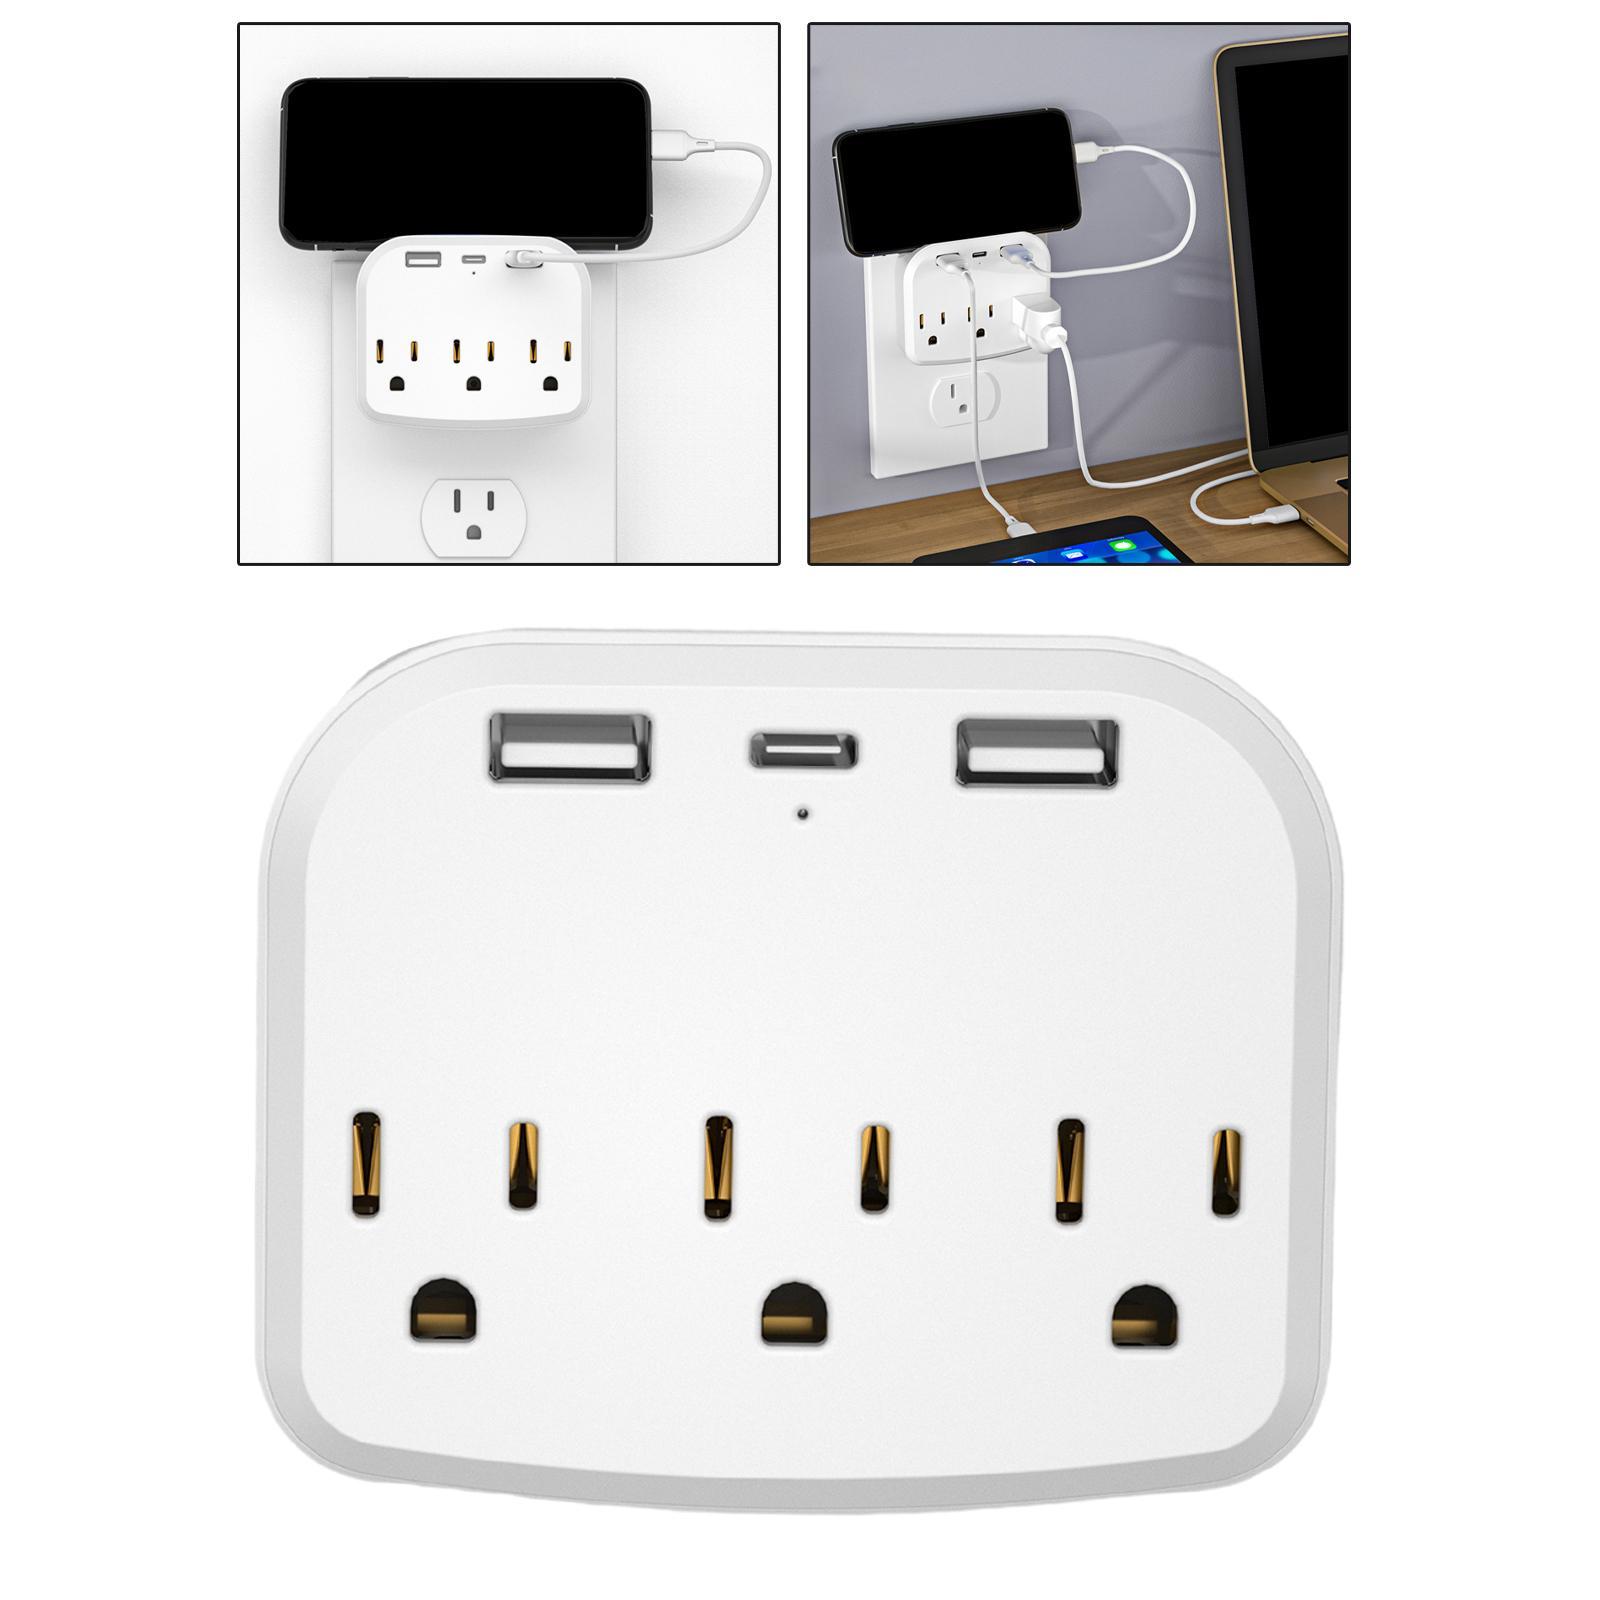 Electrical Outlet Wall Plug Multiple Ports Adapter 15A for Bedroom Desk Home